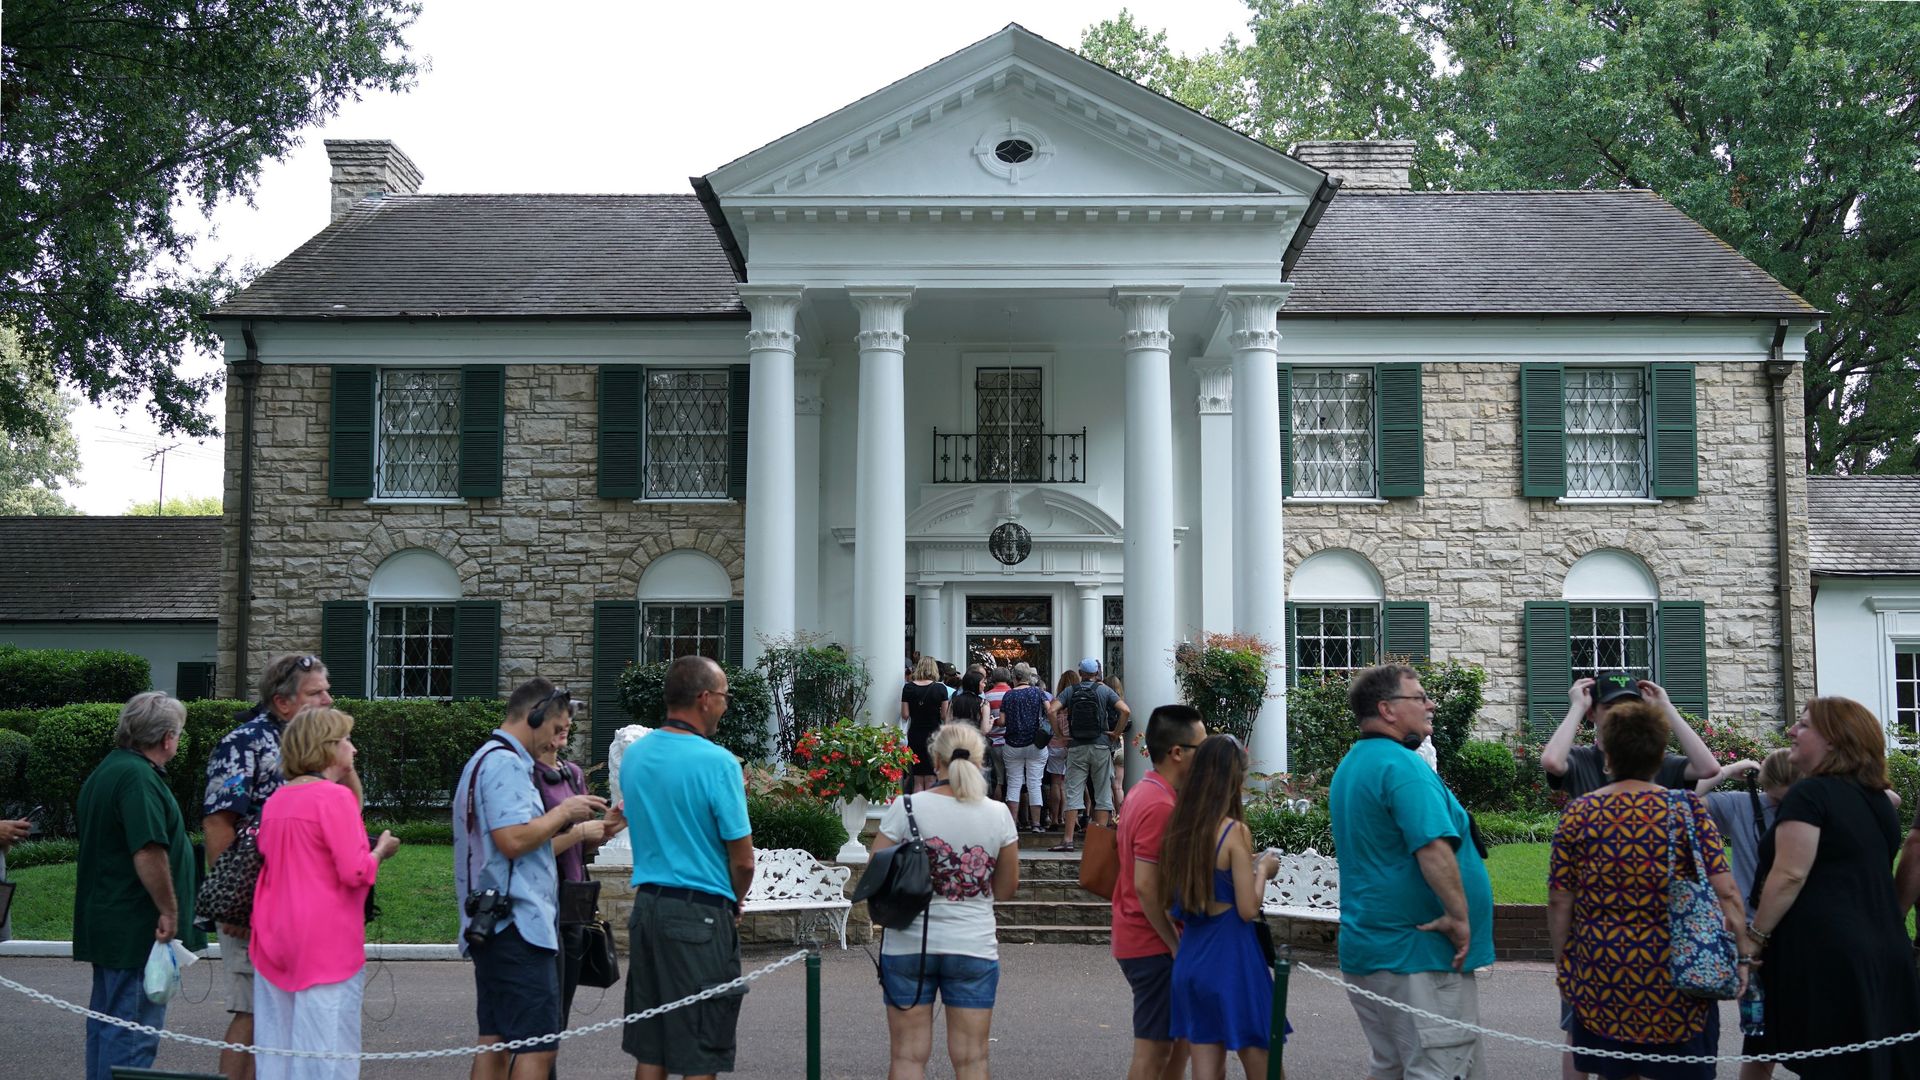 Visitors queue to enter the Graceland mansion of Elvis Presley on August 12, 2017 in Memphis, Tennessee.